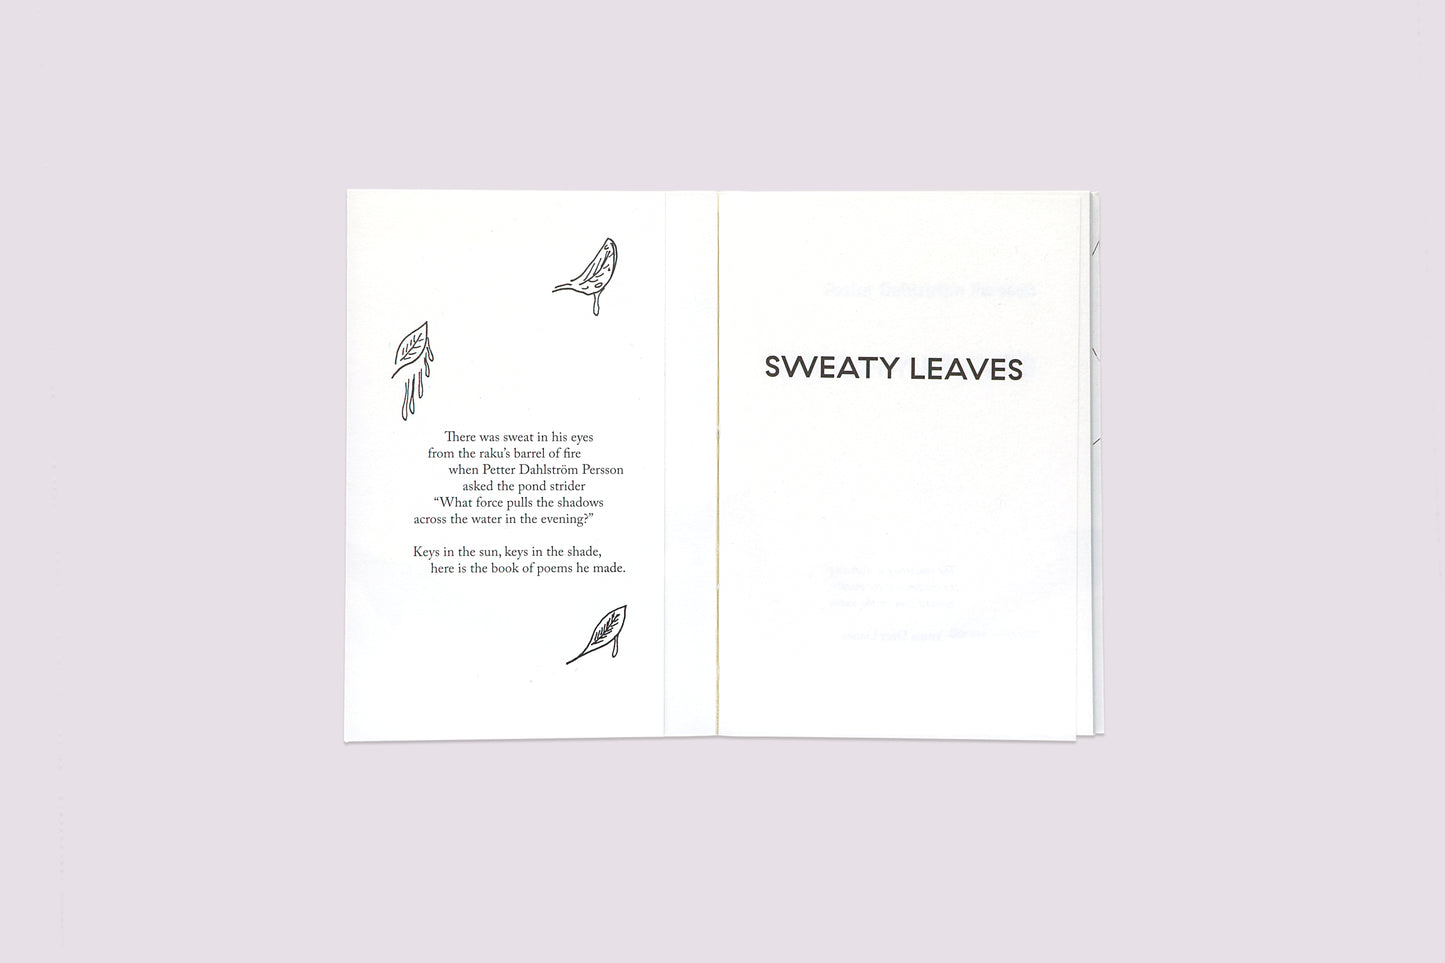 Sweaty Leaves/Petter Dahlström Persson published by Bored Wolves